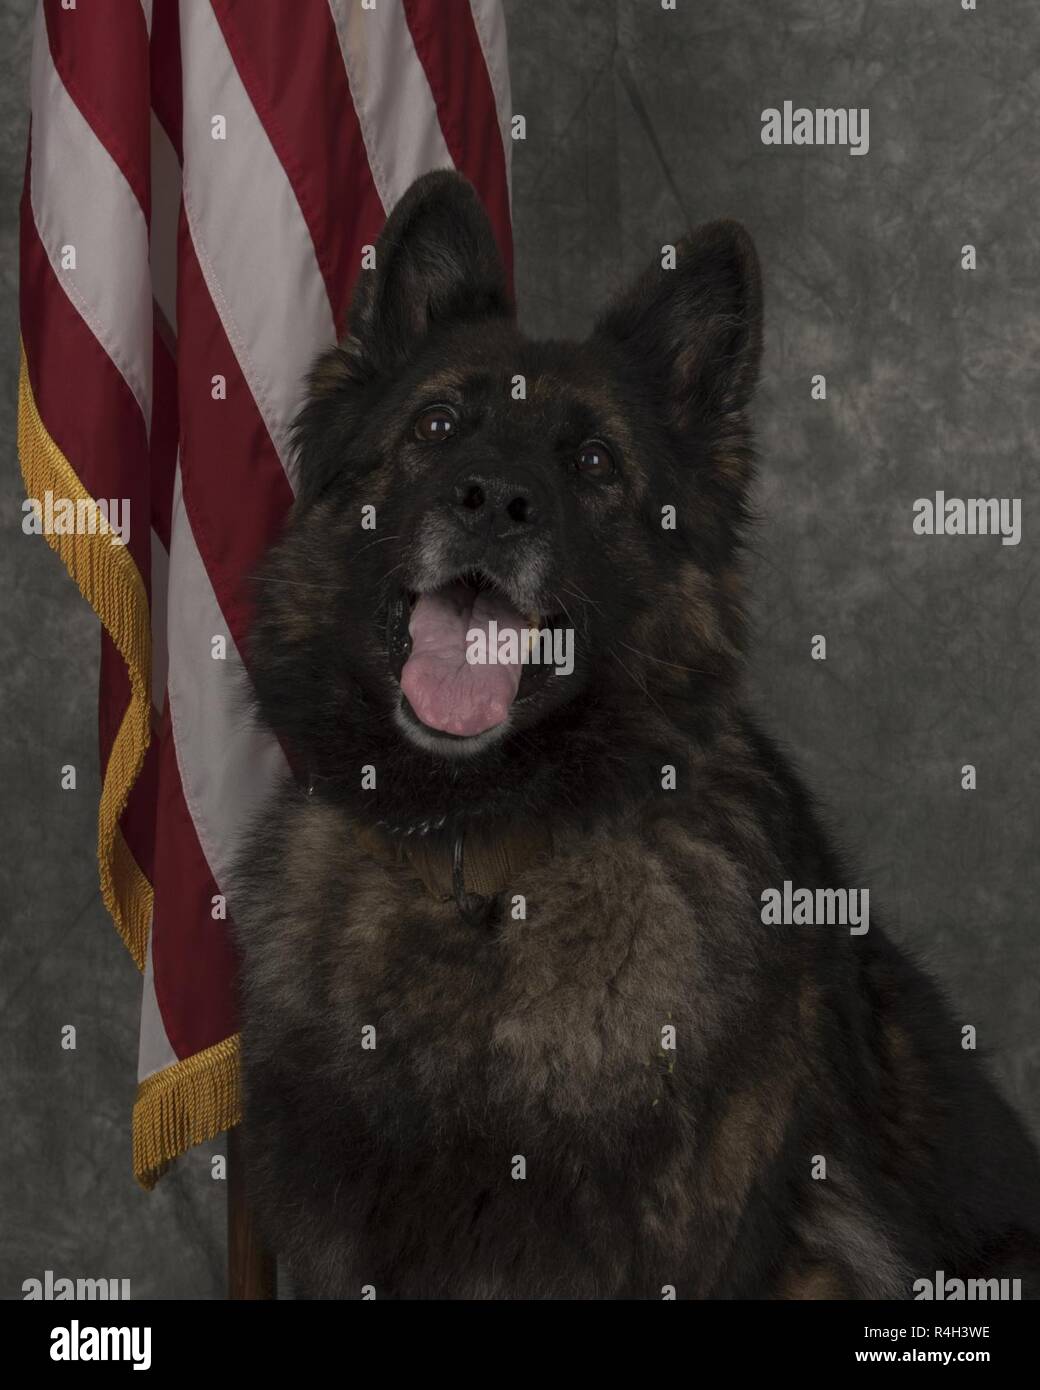 U.S. Air Force military working dog, 96th Security Forces Squadron, poses for an official photo Sept. 28, 2018, at Eglin Air Force Base, Fla. Stock Photo